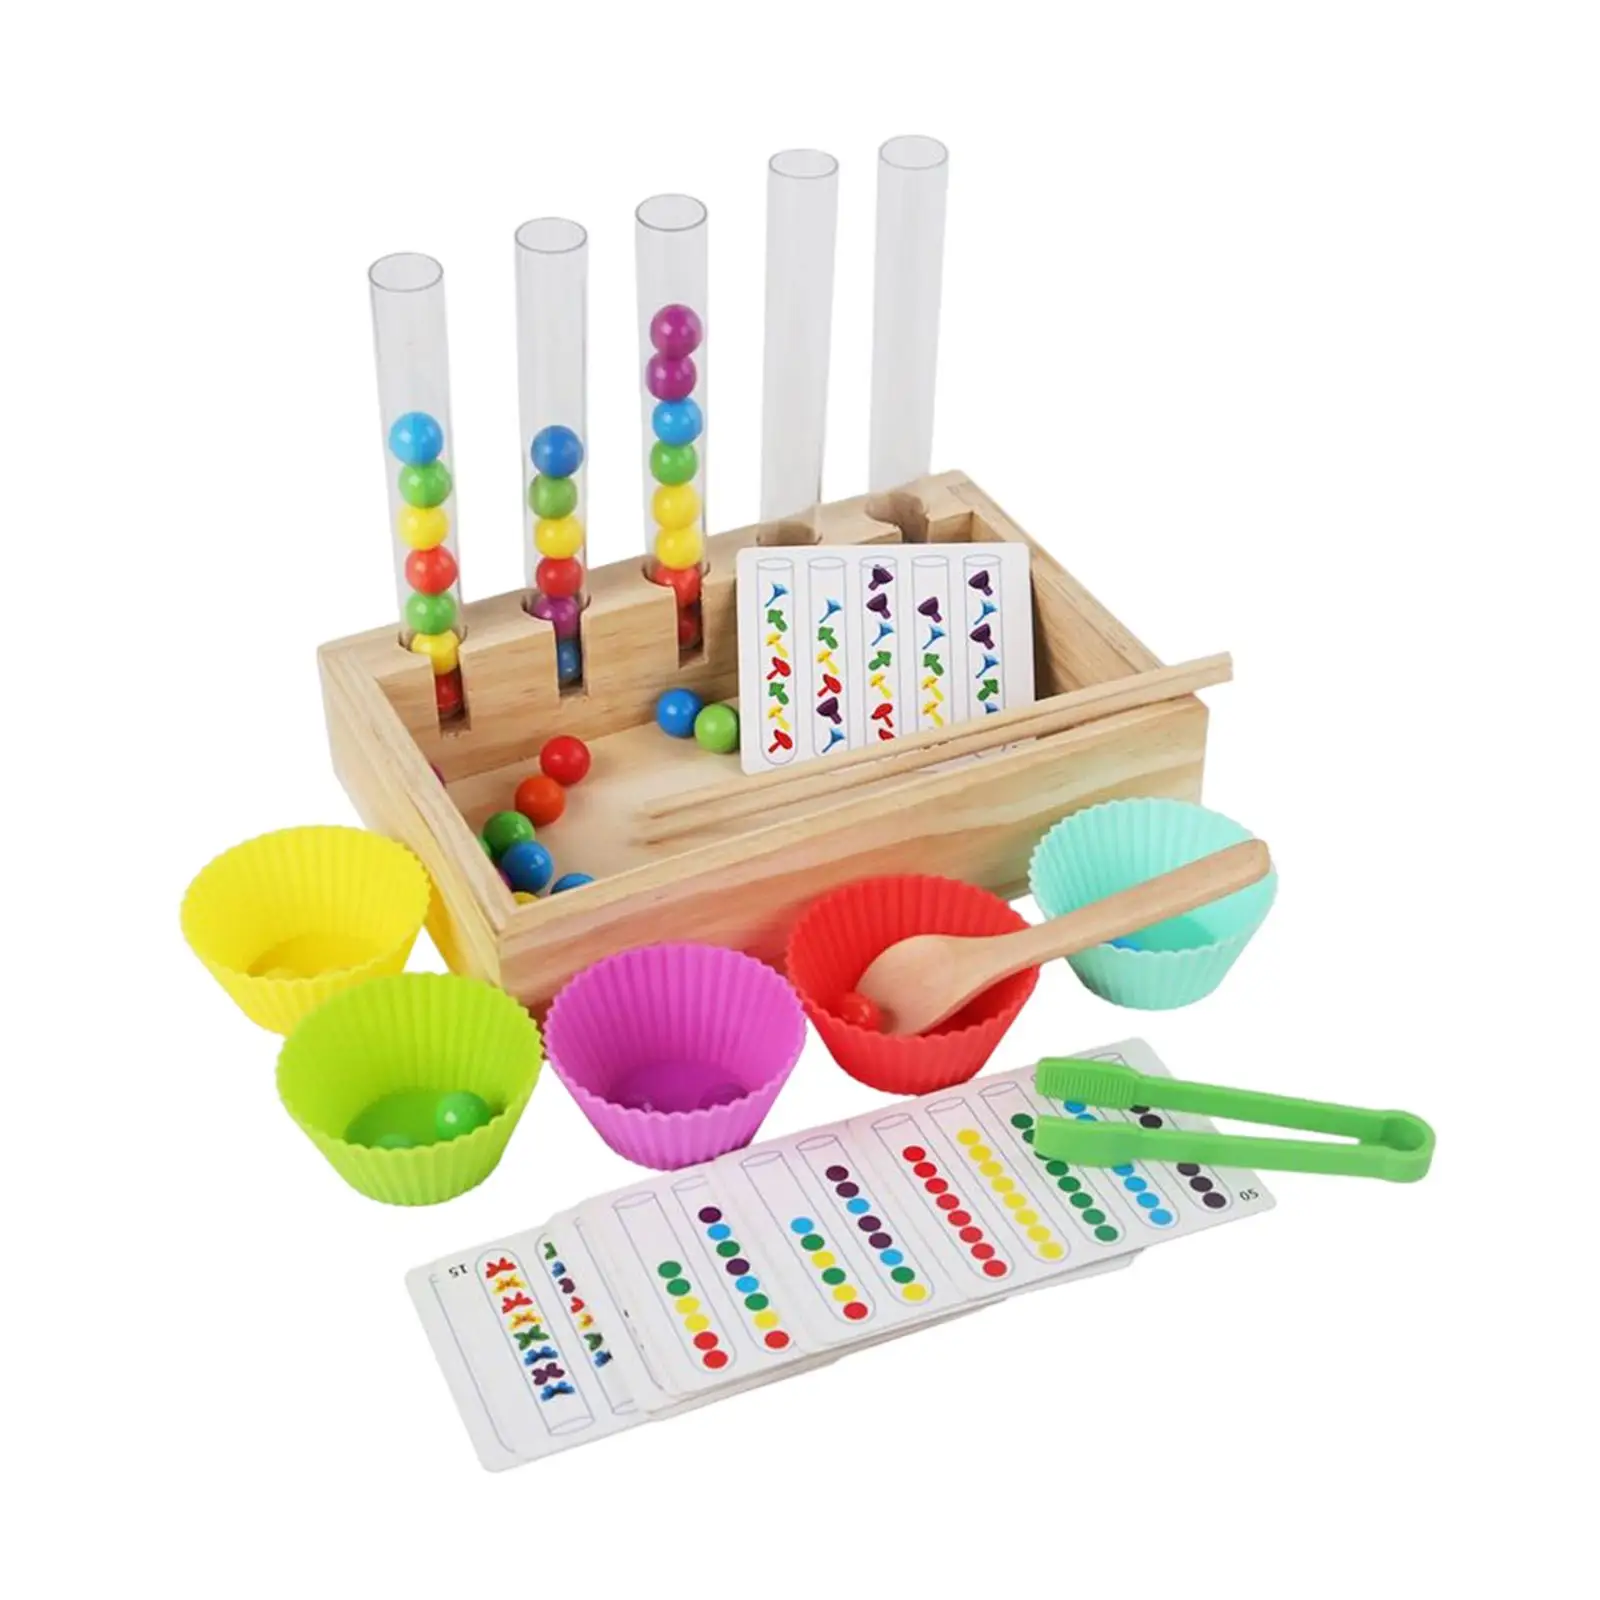 Rainbow Clip Bead Puzzle and Bowl Spoon Preschool Learning Toy Wooden Peg Board Game for Girls and Boys Toddler Kids Children